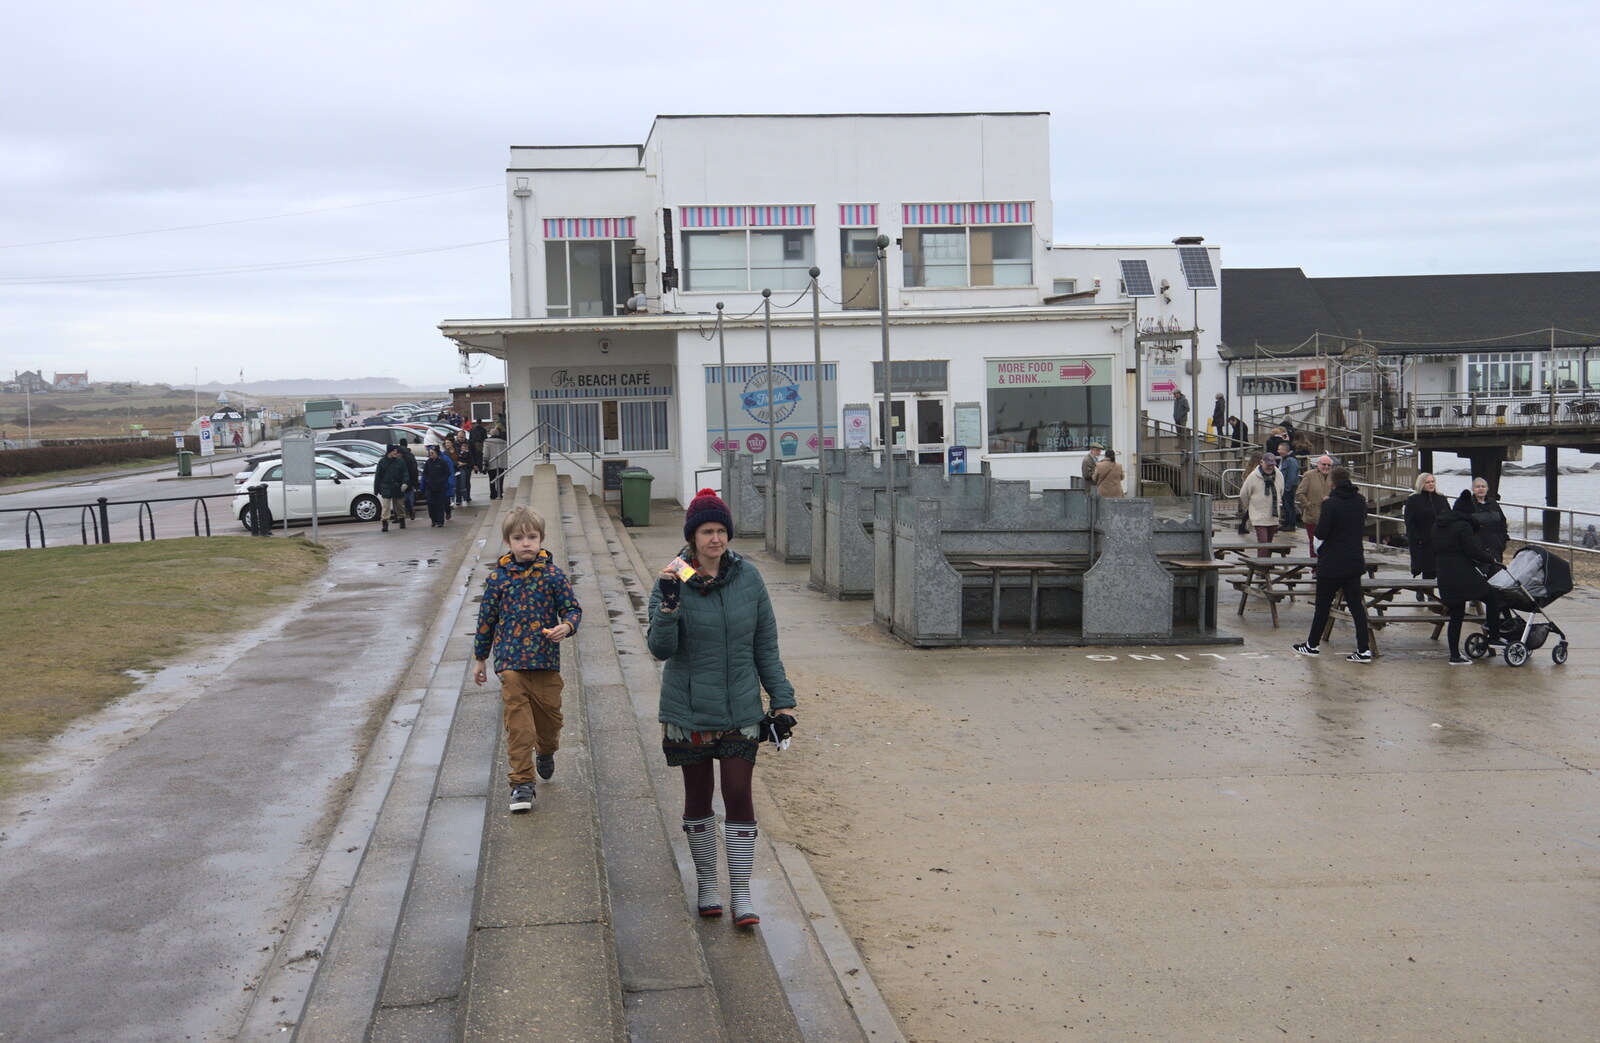 Harry and Isobel on the wall near the Beach Café from A Southwold Car Picnic, Southwold, Suffolk - 11th March 2018